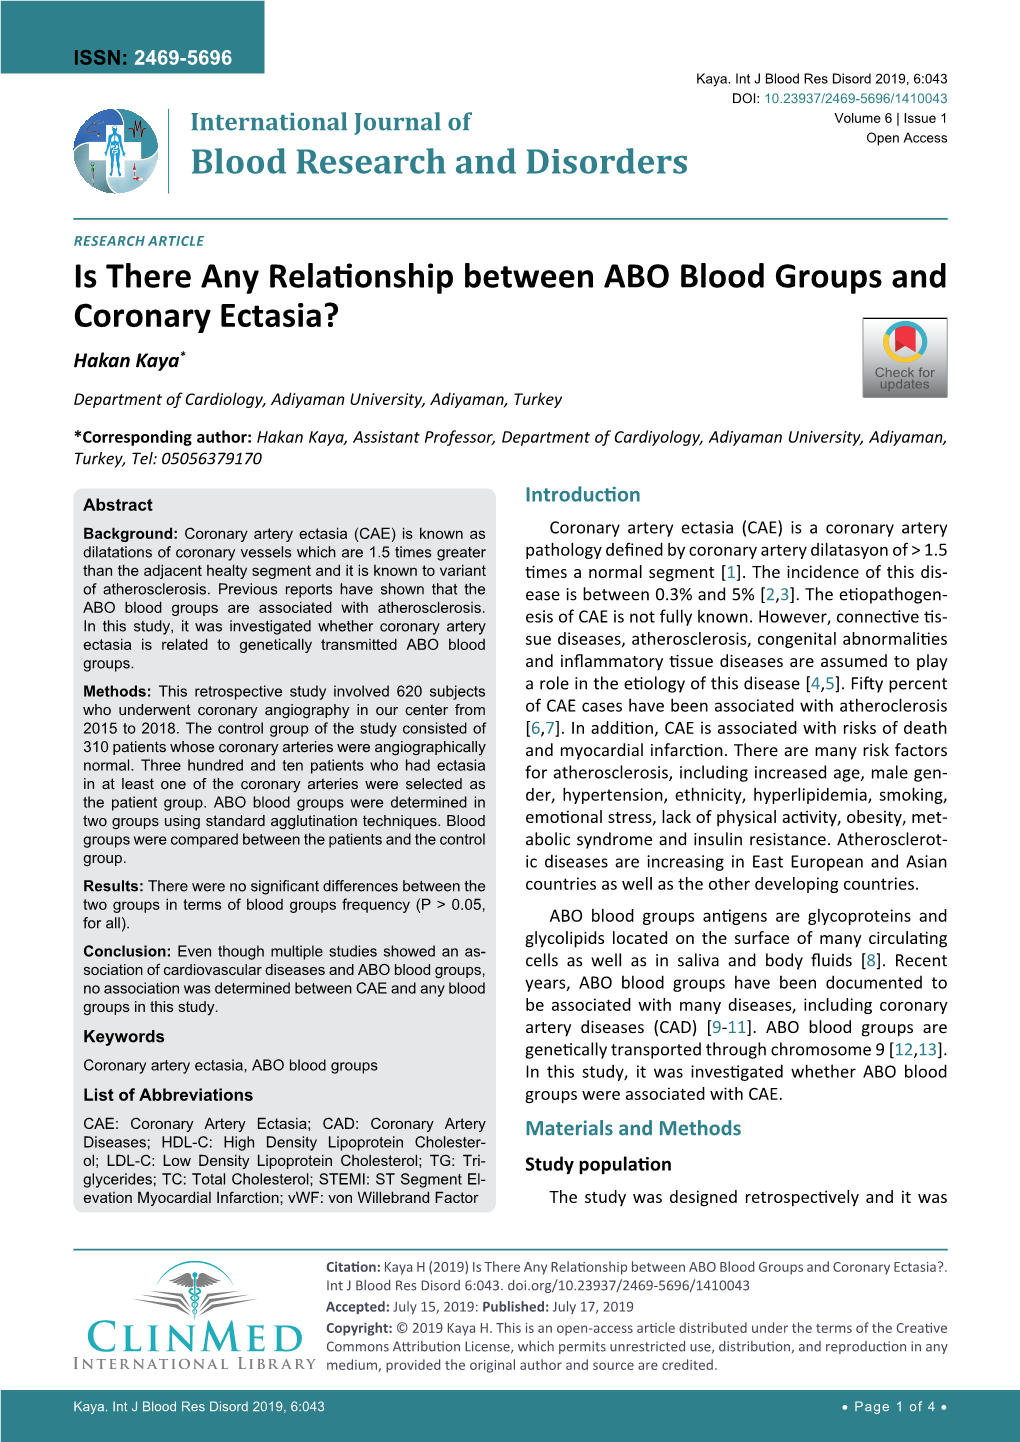 Is There Any Relationship Between ABO Blood Groups and Coronary